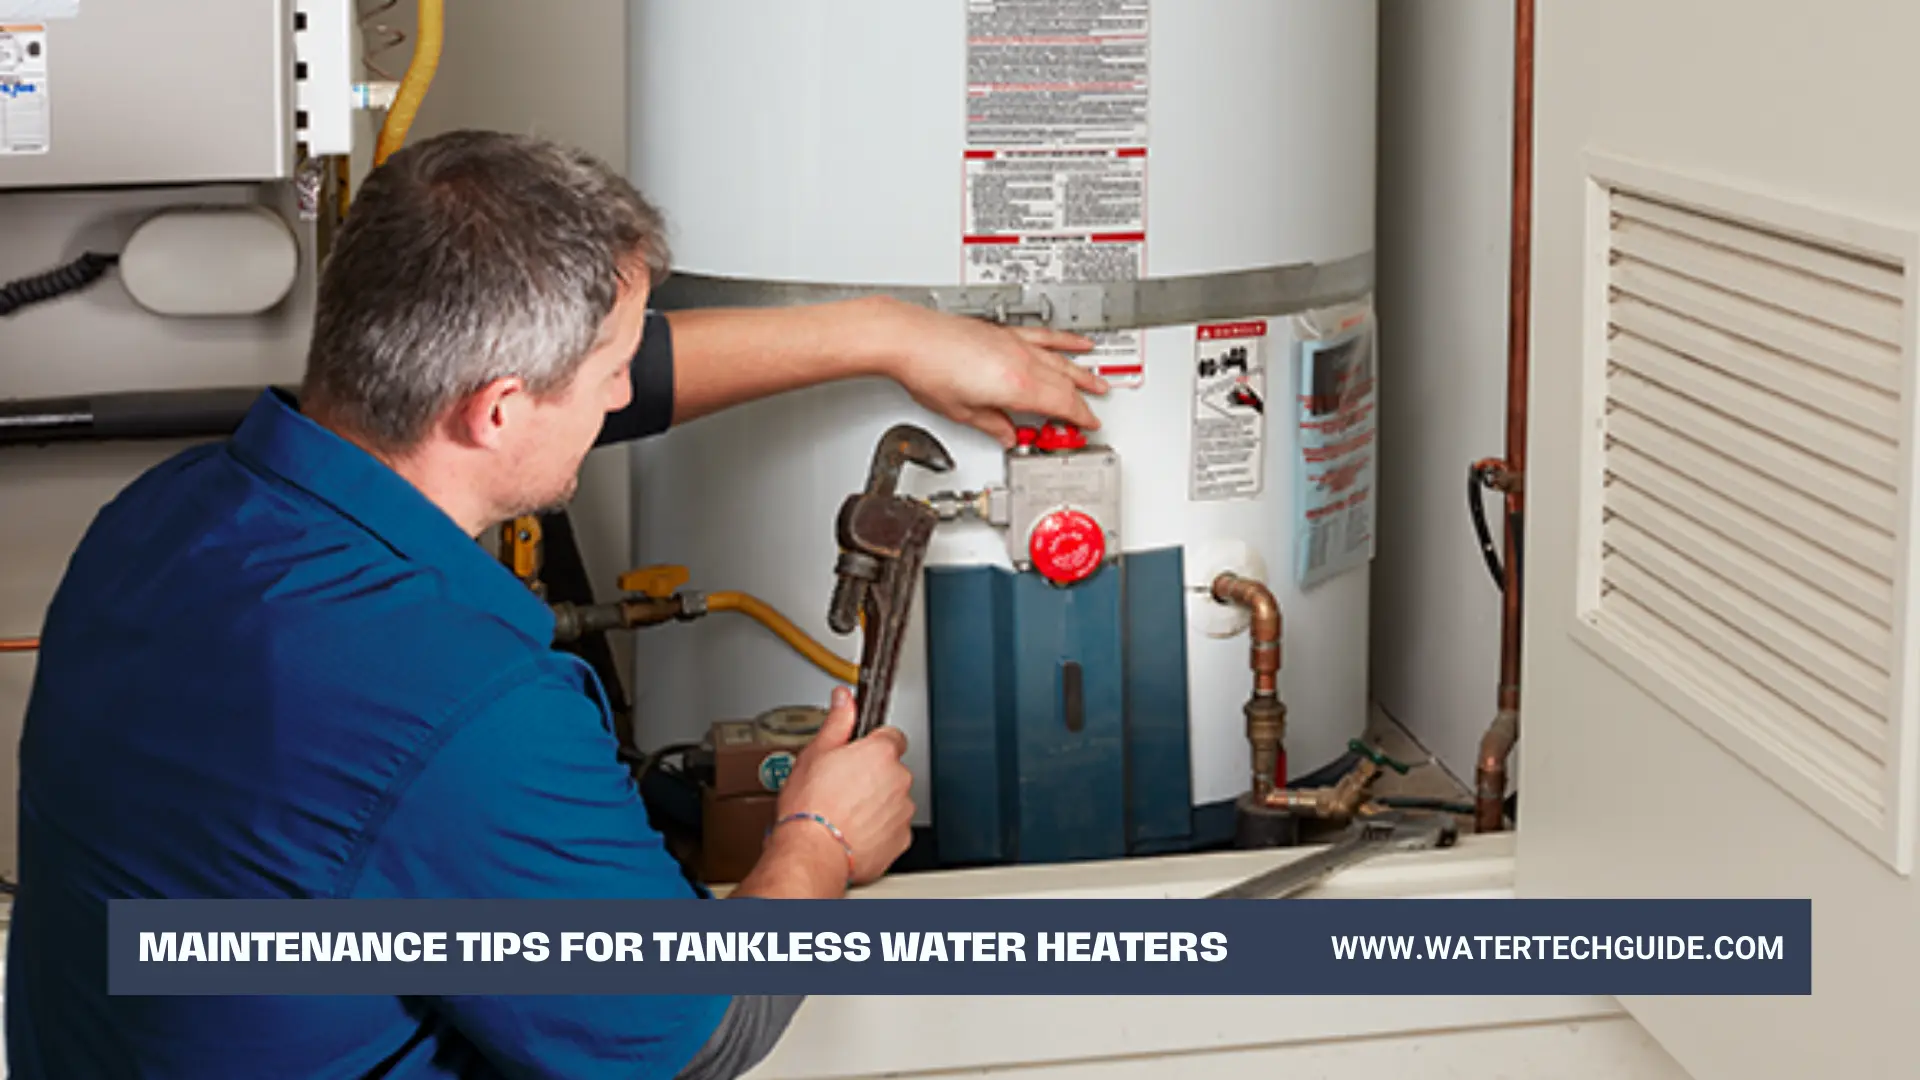 Maintenance Tips For Tankless Water Heaters